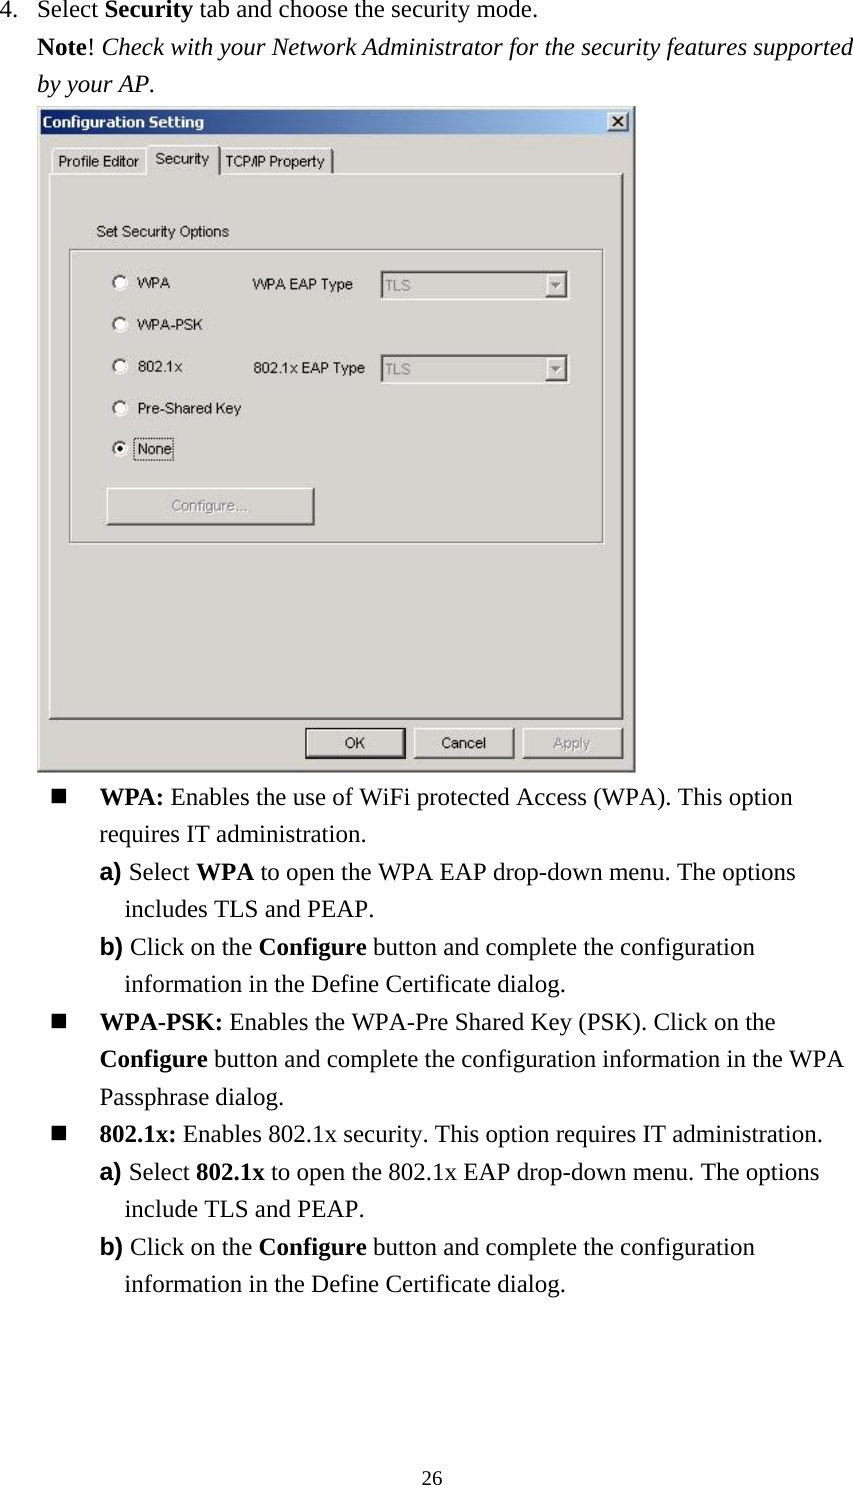  264. Select Security tab and choose the security mode. Note! Check with your Network Administrator for the security features supported by your AP.   WPA: Enables the use of WiFi protected Access (WPA). This option requires IT administration. a) Select WPA to open the WPA EAP drop-down menu. The options includes TLS and PEAP. b) Click on the Configure button and complete the configuration information in the Define Certificate dialog.  WPA-PSK: Enables the WPA-Pre Shared Key (PSK). Click on the Configure button and complete the configuration information in the WPA Passphrase dialog.  802.1x: Enables 802.1x security. This option requires IT administration. a) Select 802.1x to open the 802.1x EAP drop-down menu. The options include TLS and PEAP. b) Click on the Configure button and complete the configuration information in the Define Certificate dialog. 